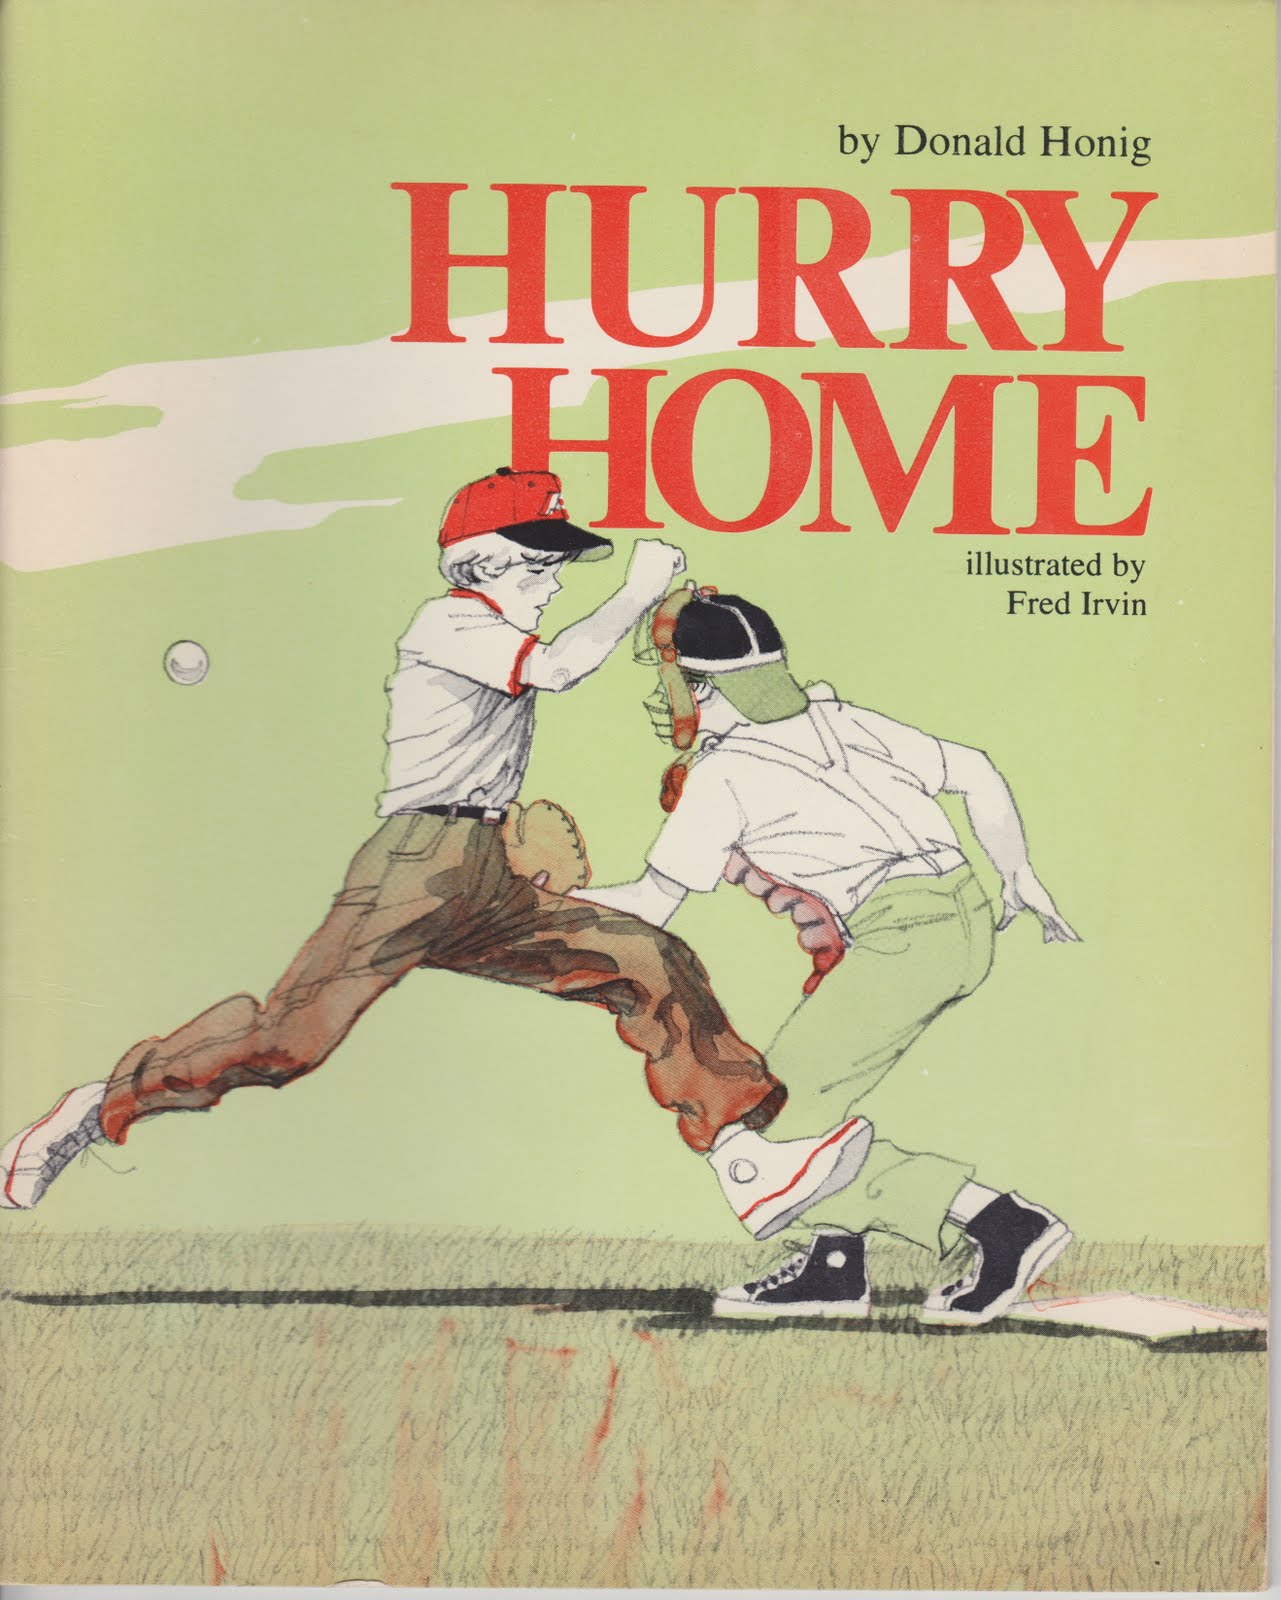 The St. Louis Cardinals: An Illustrated book by Donald Honig